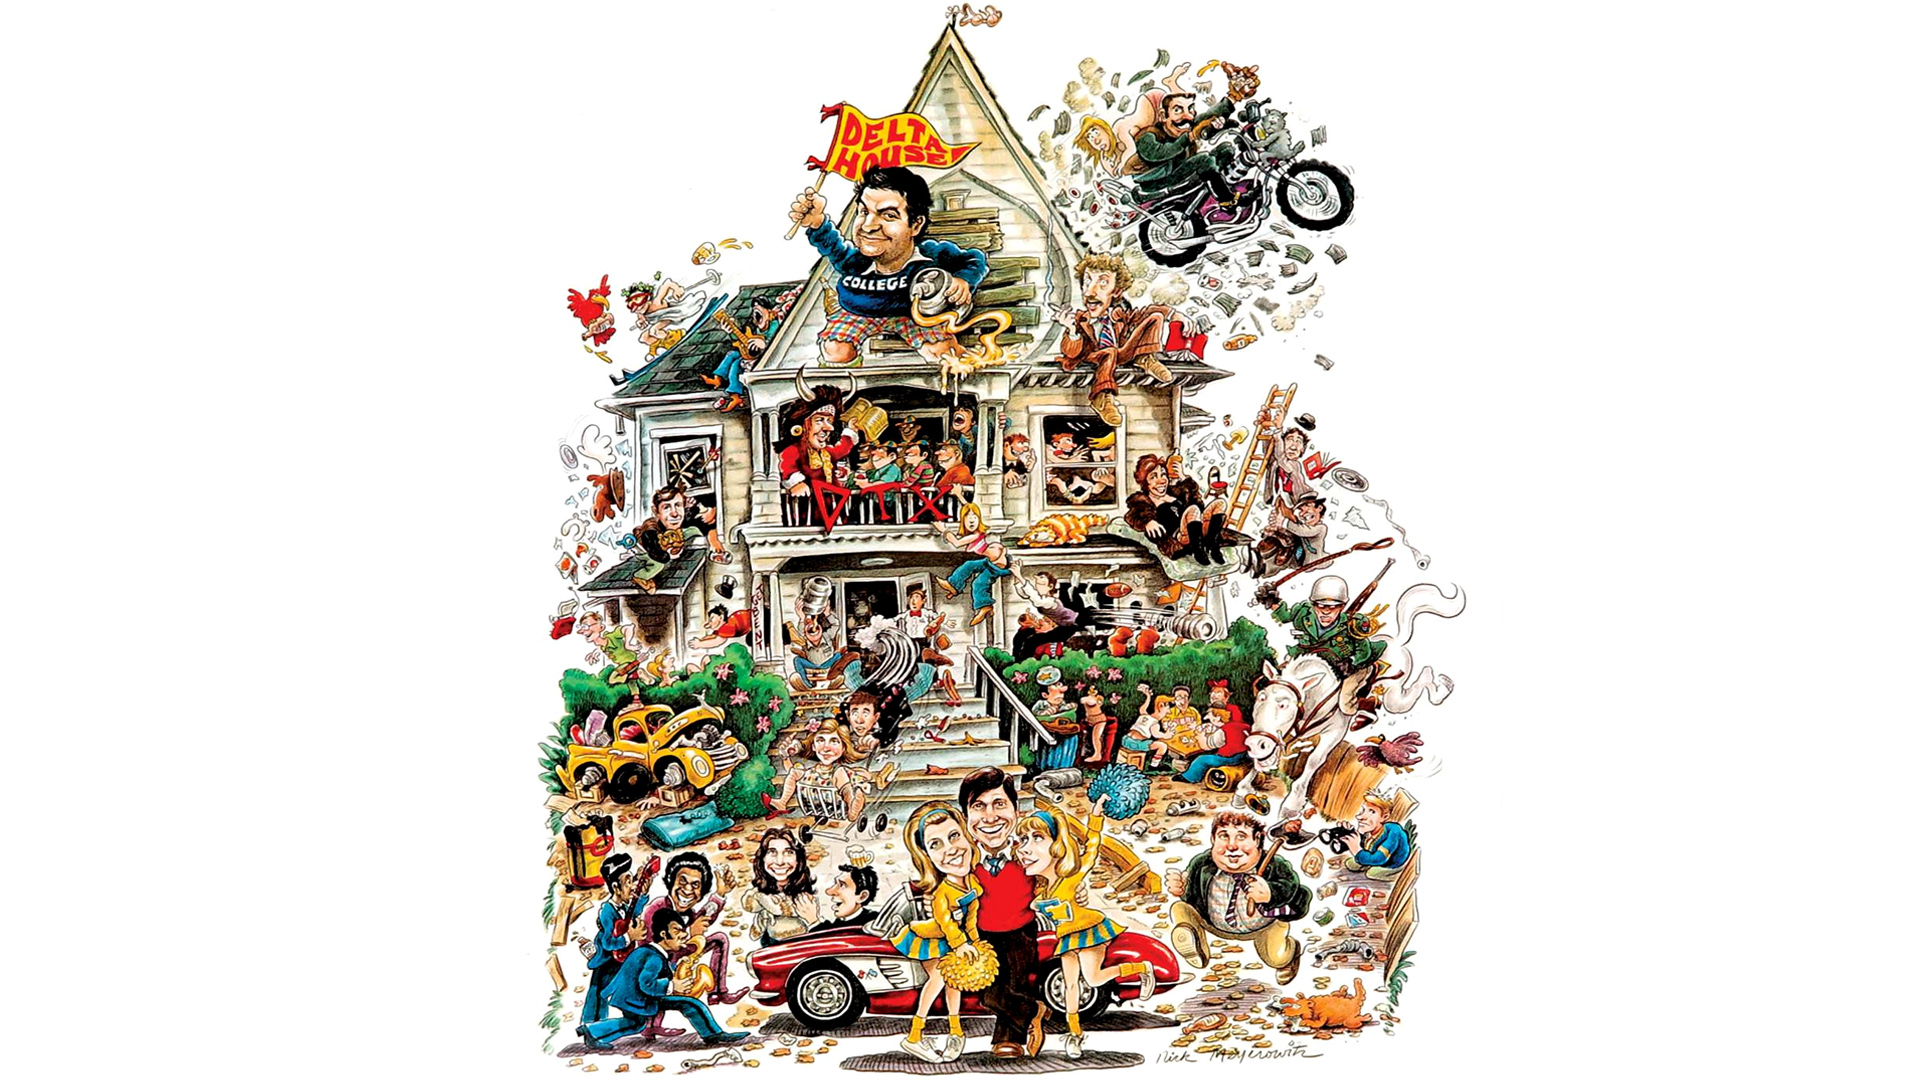 Animal House Backgrounds, Compatible - PC, Mobile, Gadgets| 1920x1080 px